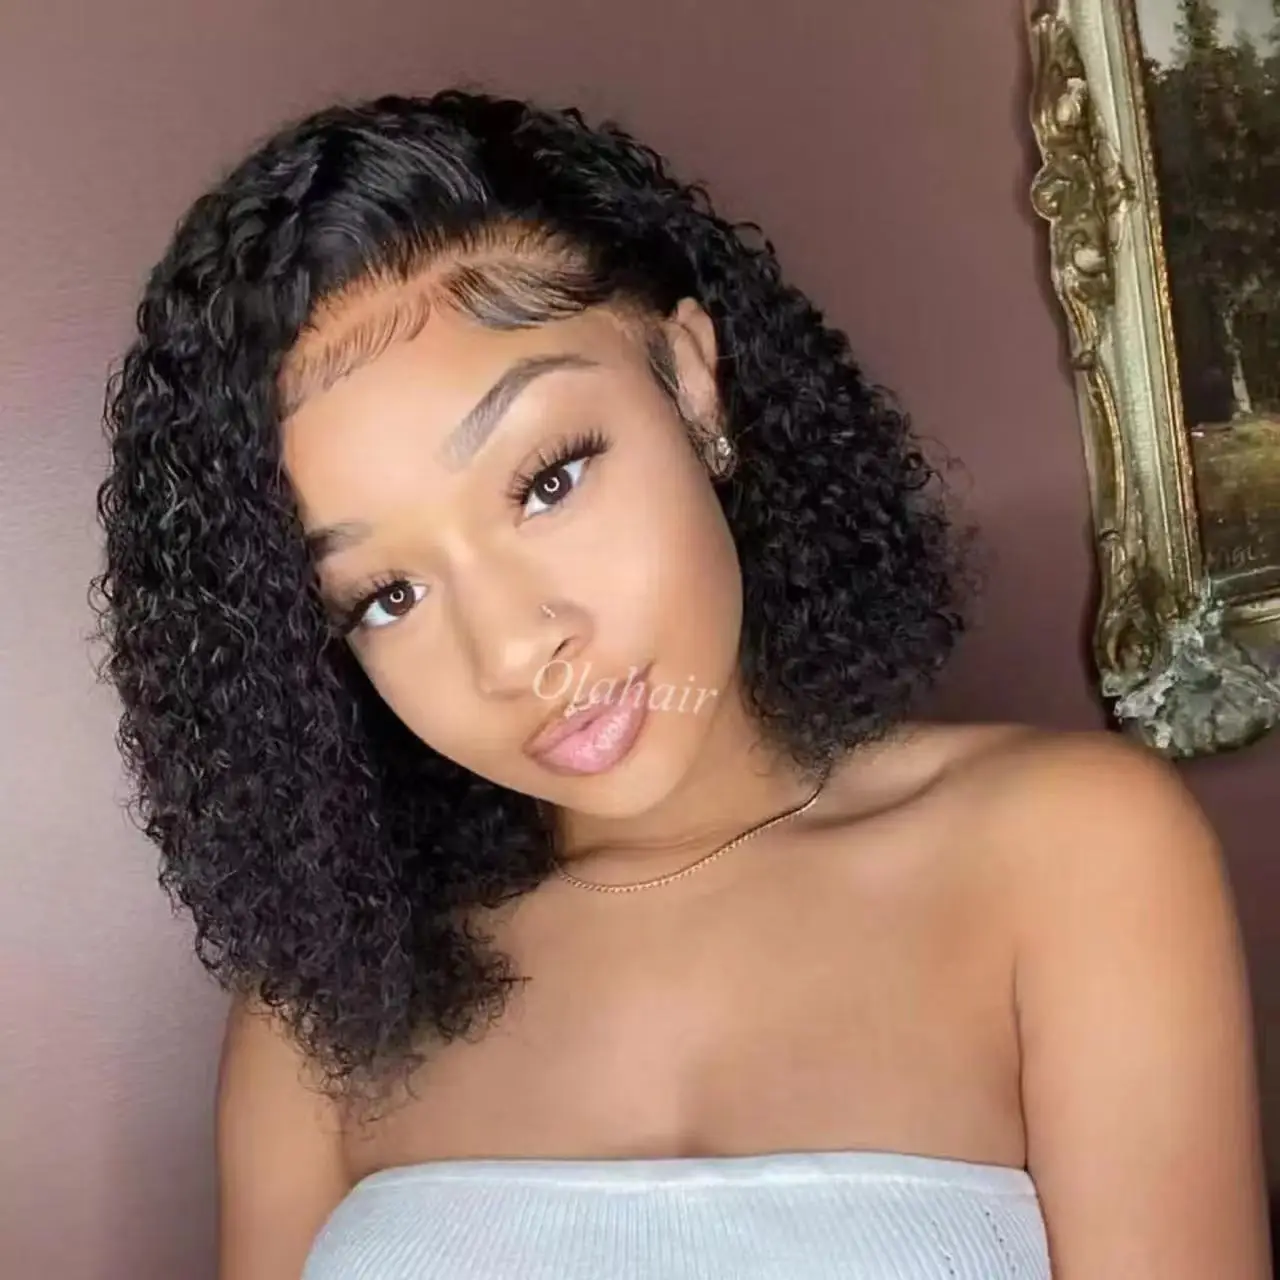 Olahair Body Wave Short Bob Wigs - Buy Human Hair Full Lace Wigs,Brazilian  Hair Wigs For Black Women,Straight Human Hair Bundles With Closure Product  on 